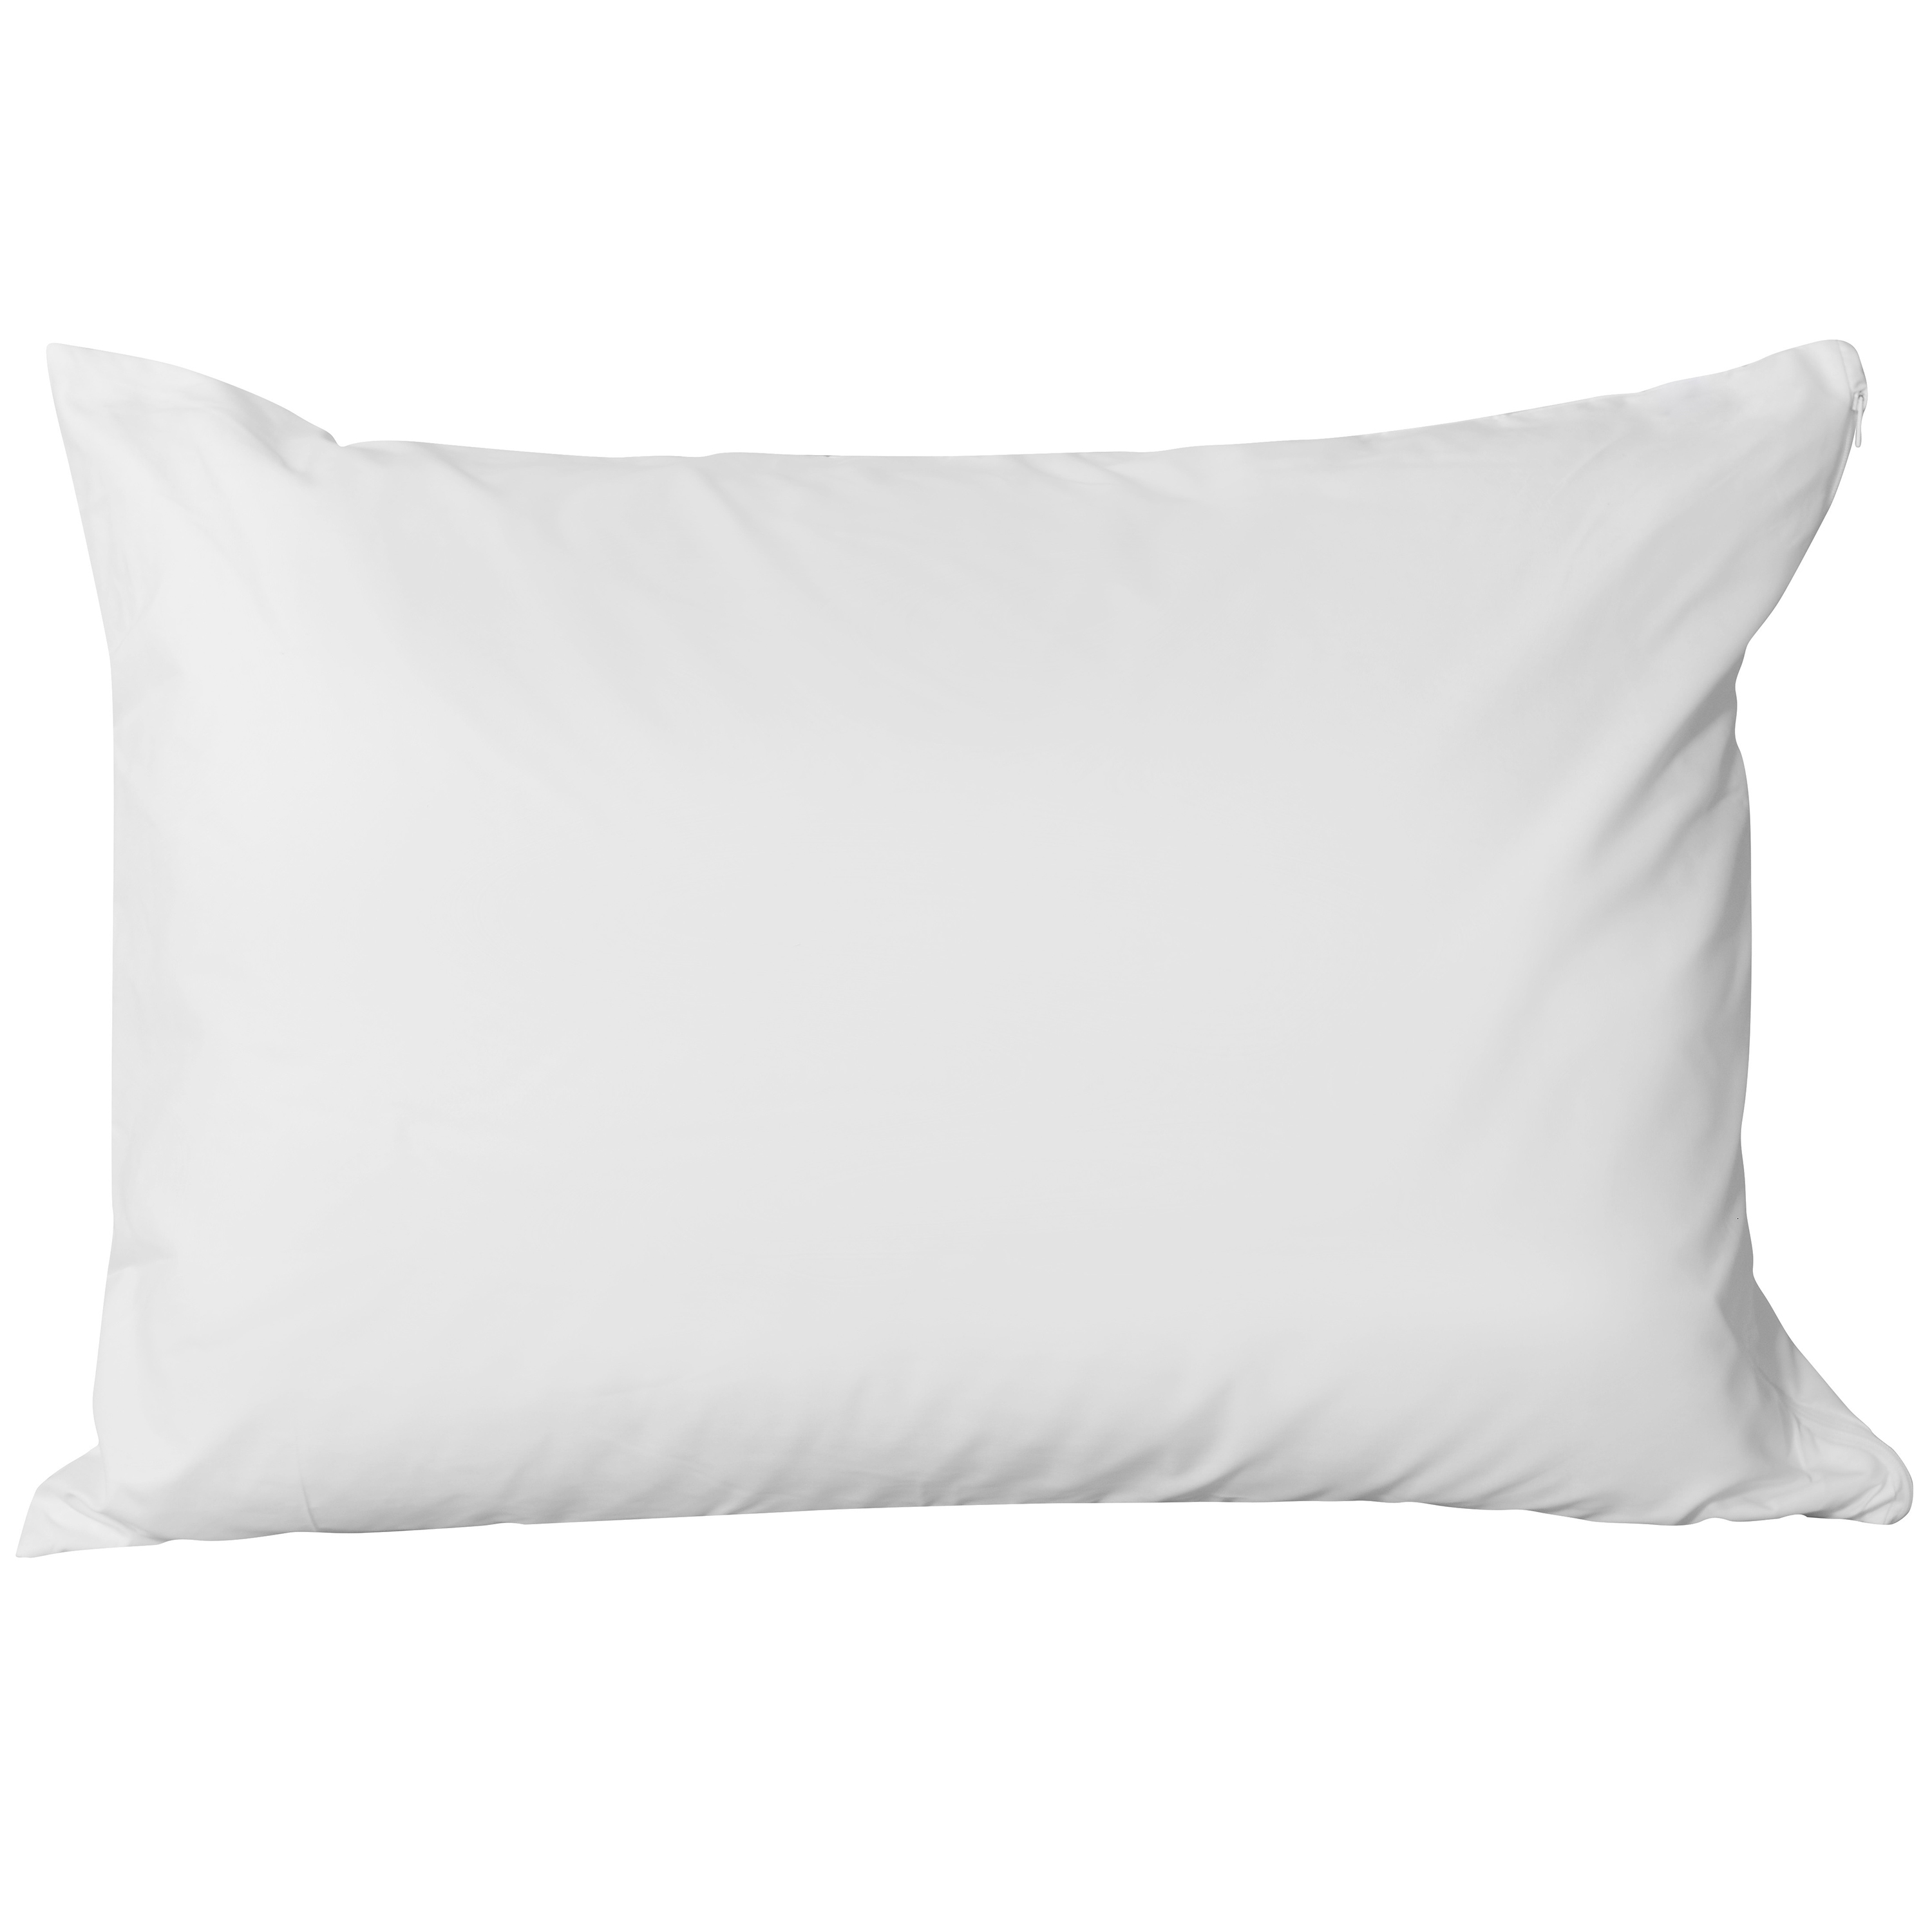 Allerease Cotton Zippered Pillow Protector, Standard, 2 Pack - image 5 of 8